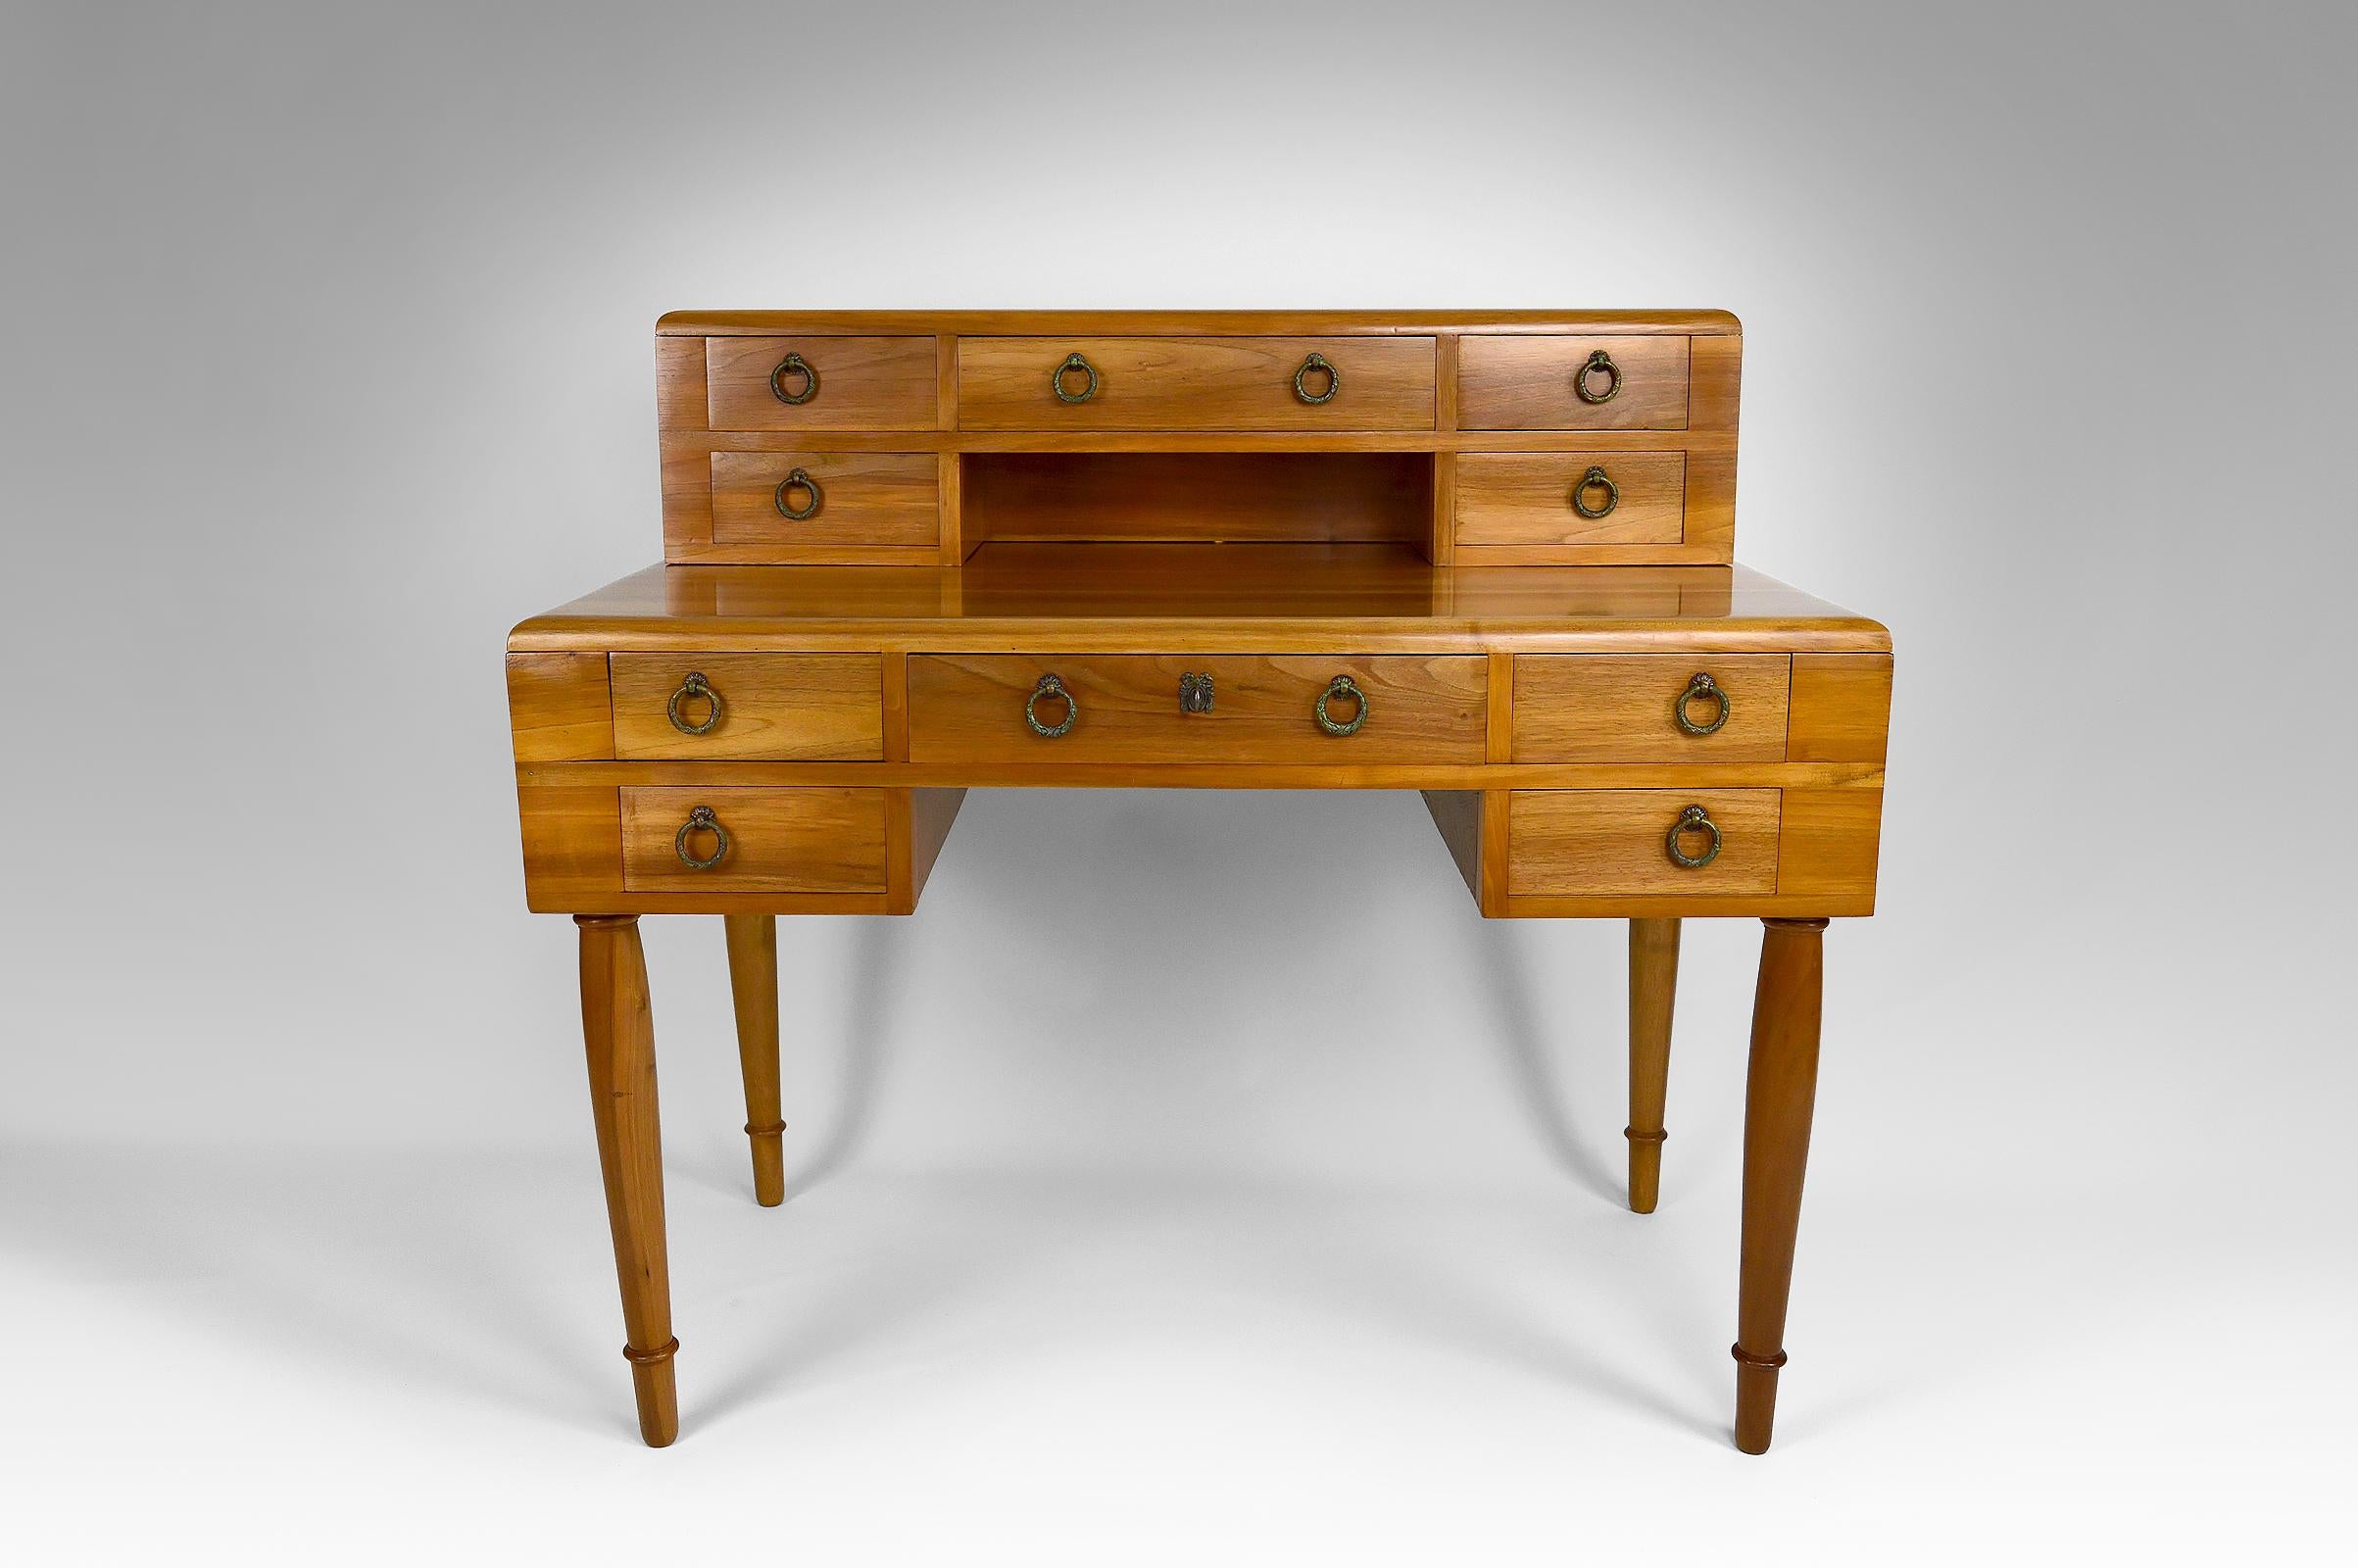 French Art Deco / Neoclassical Revival Walnut Desk, France, circa 1940 For Sale